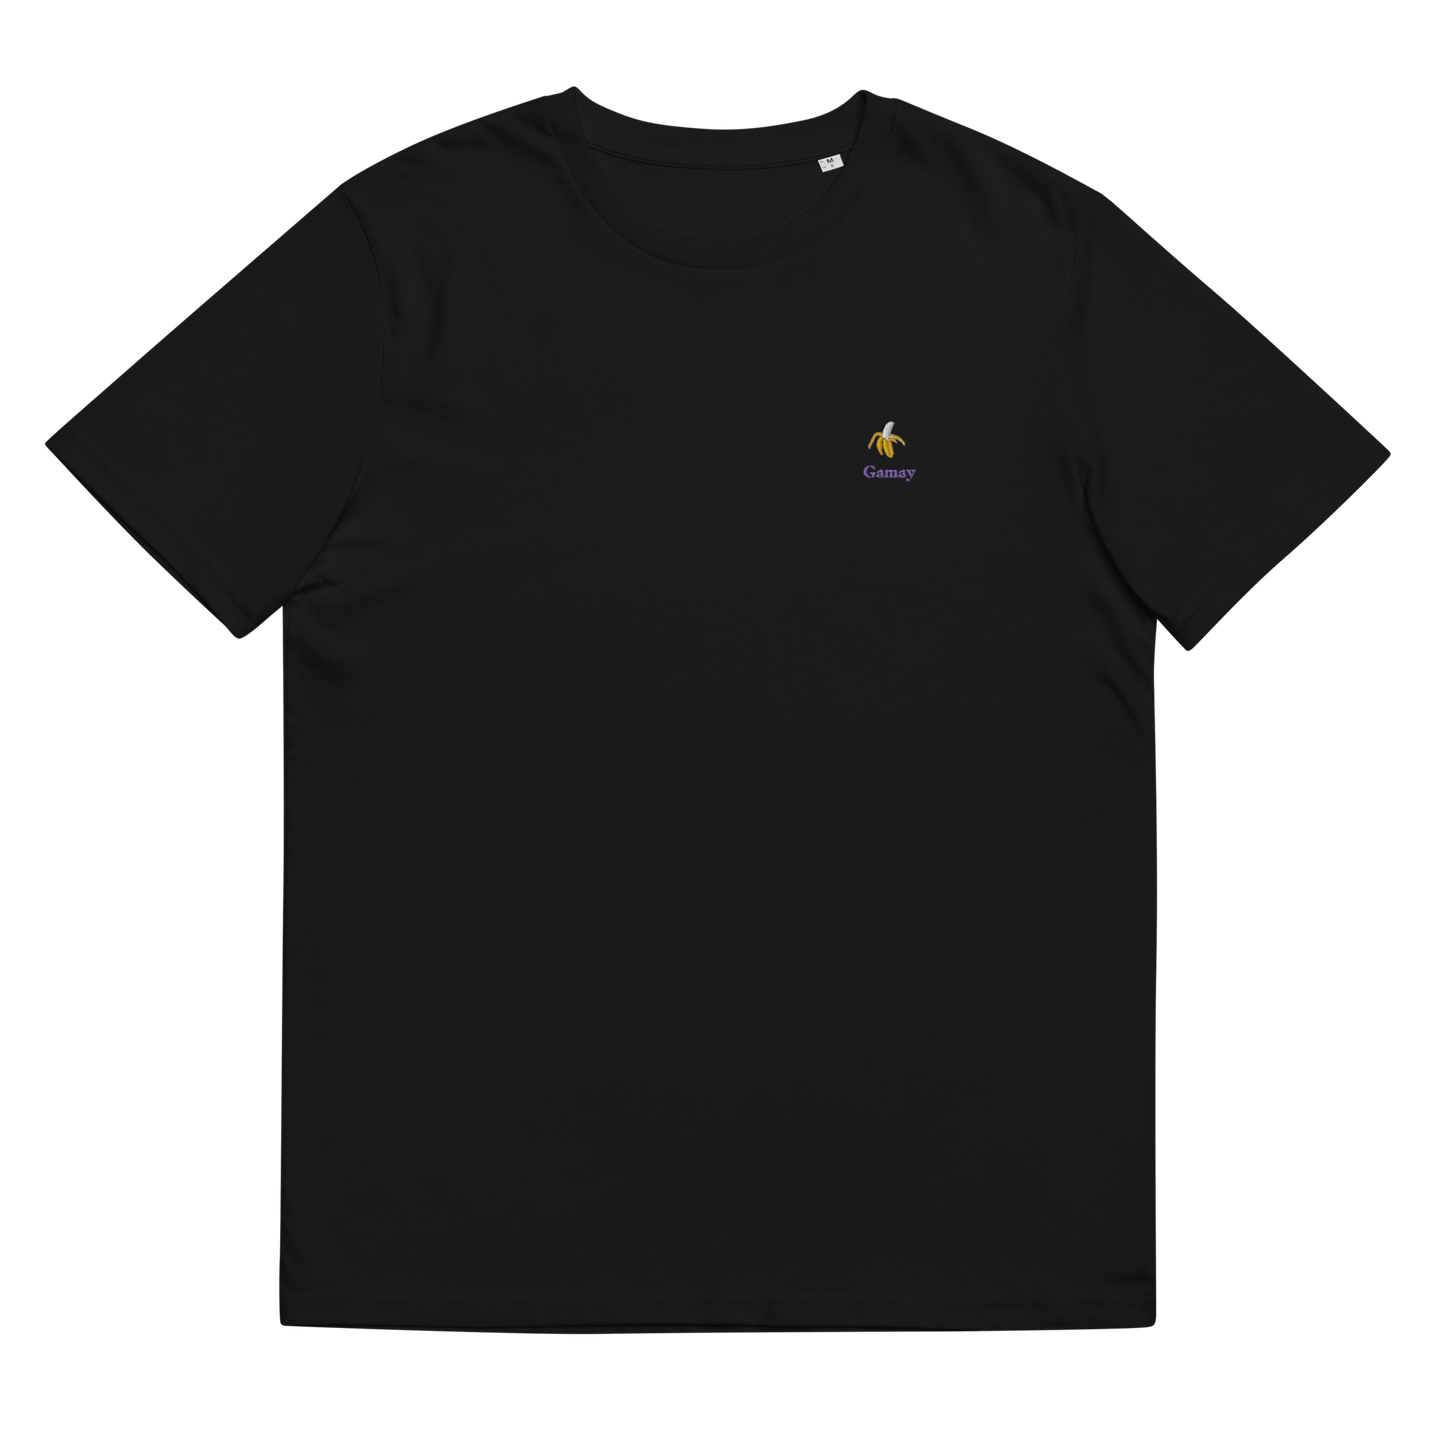 Gamay black embroidered t-shirt